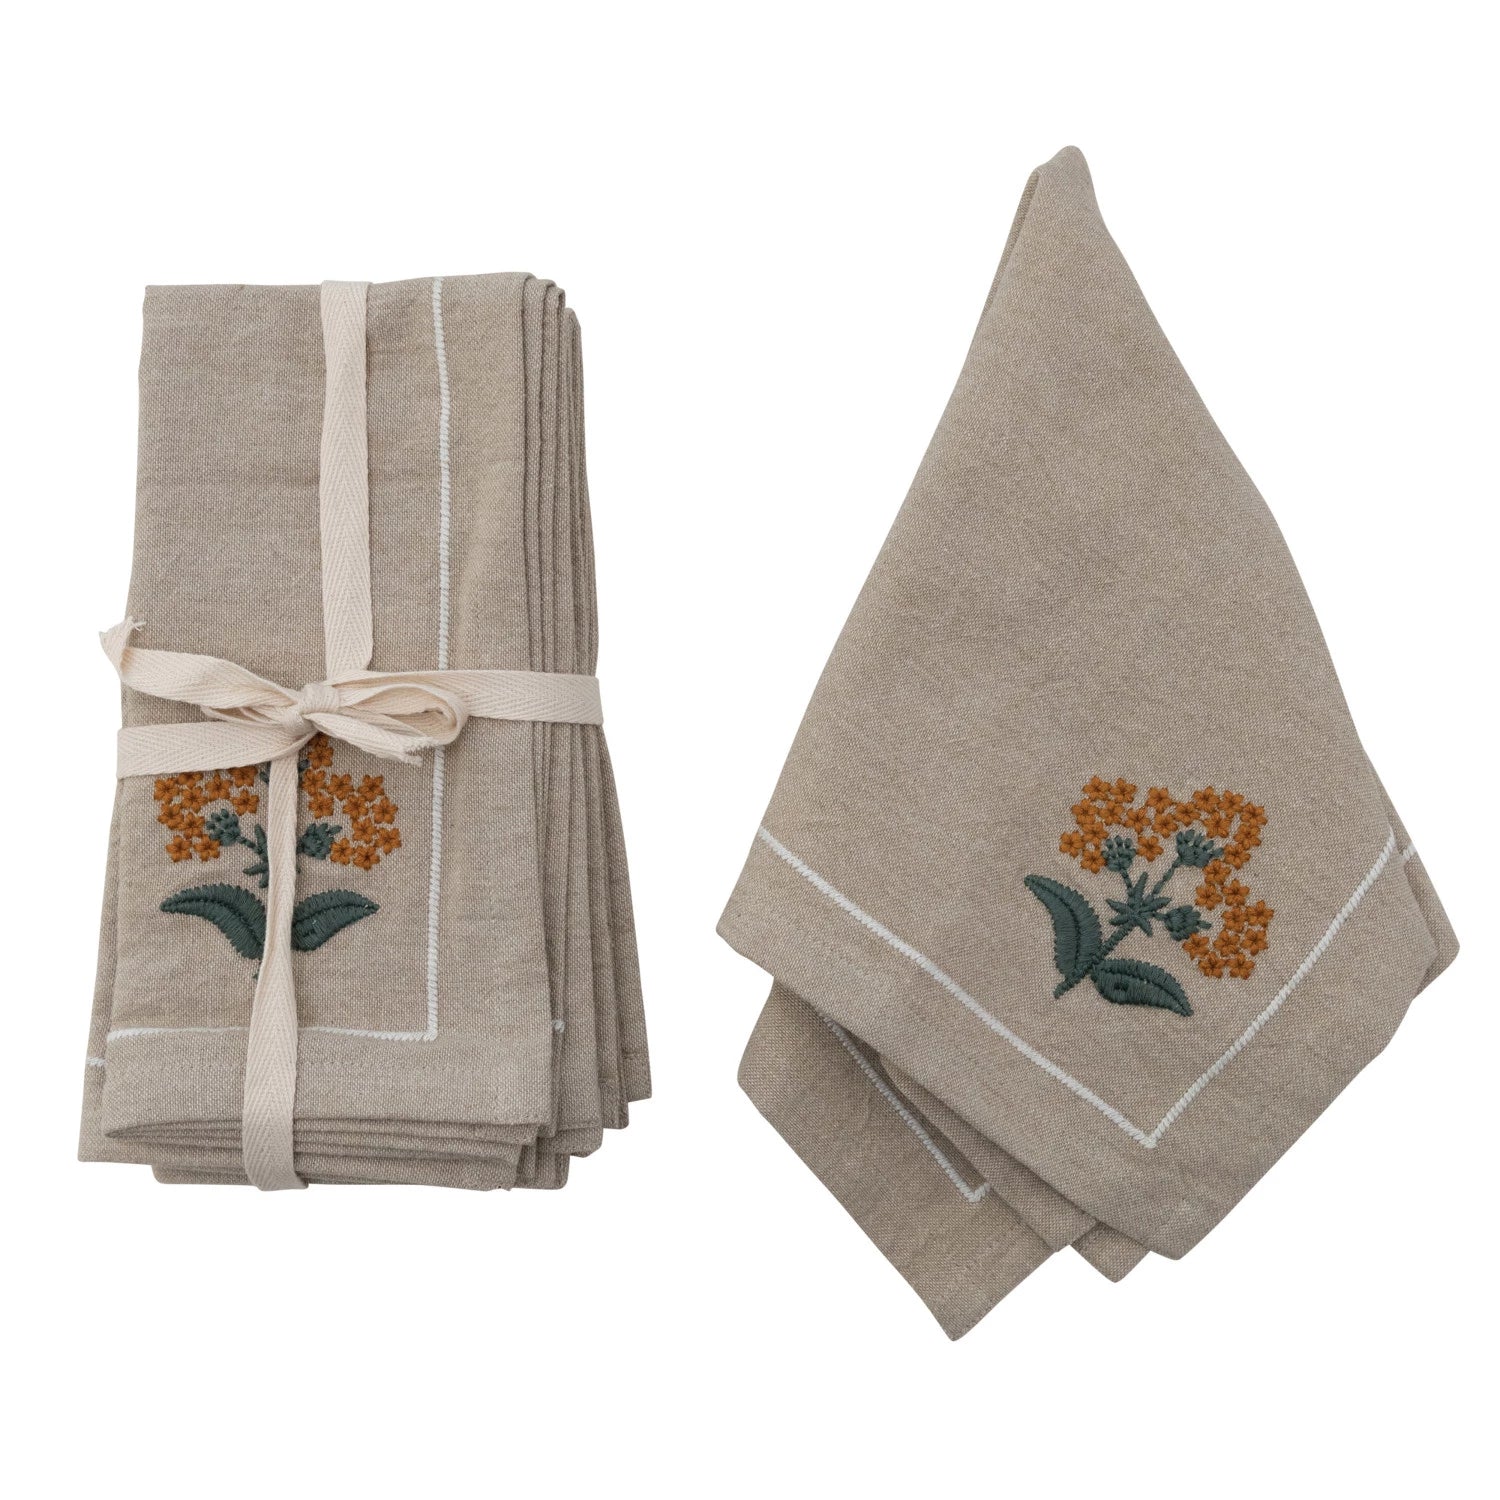 Cotton Napkins w/ Floral Embroidery & French Knots, Set of 4 12044599